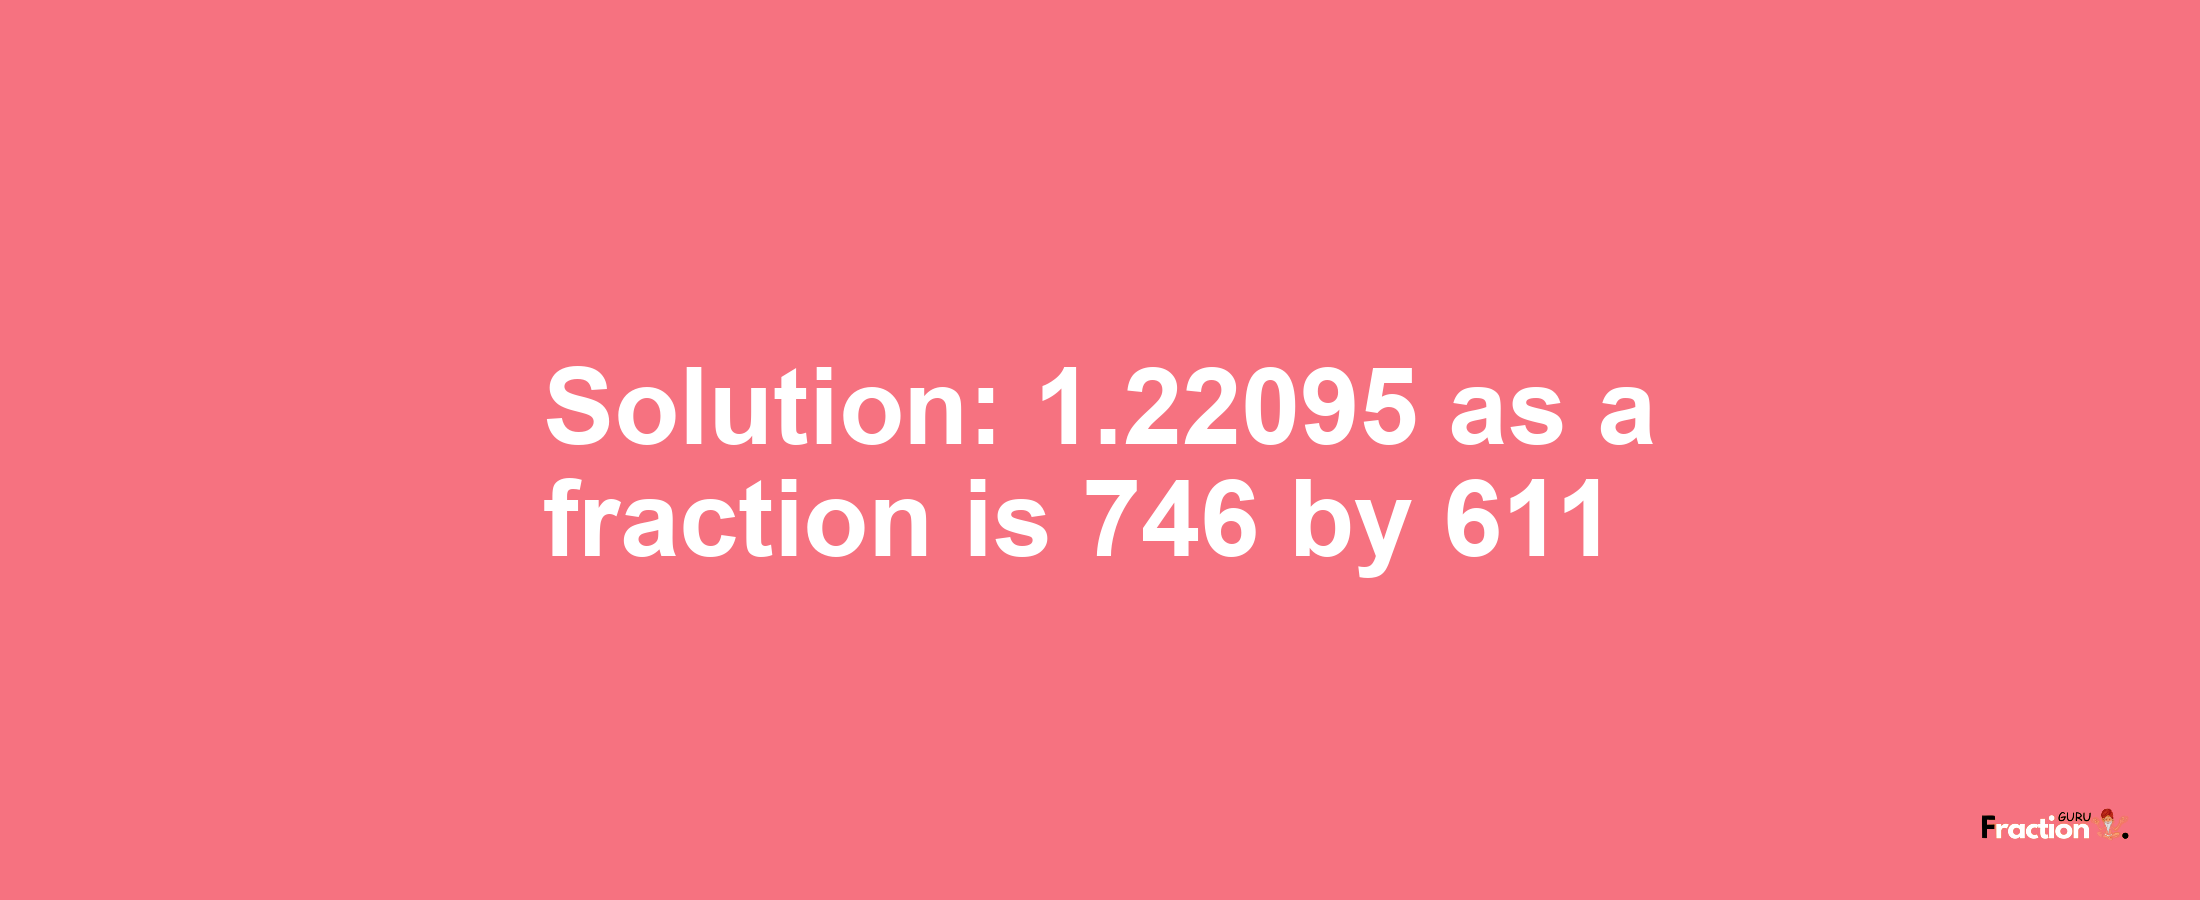 Solution:1.22095 as a fraction is 746/611